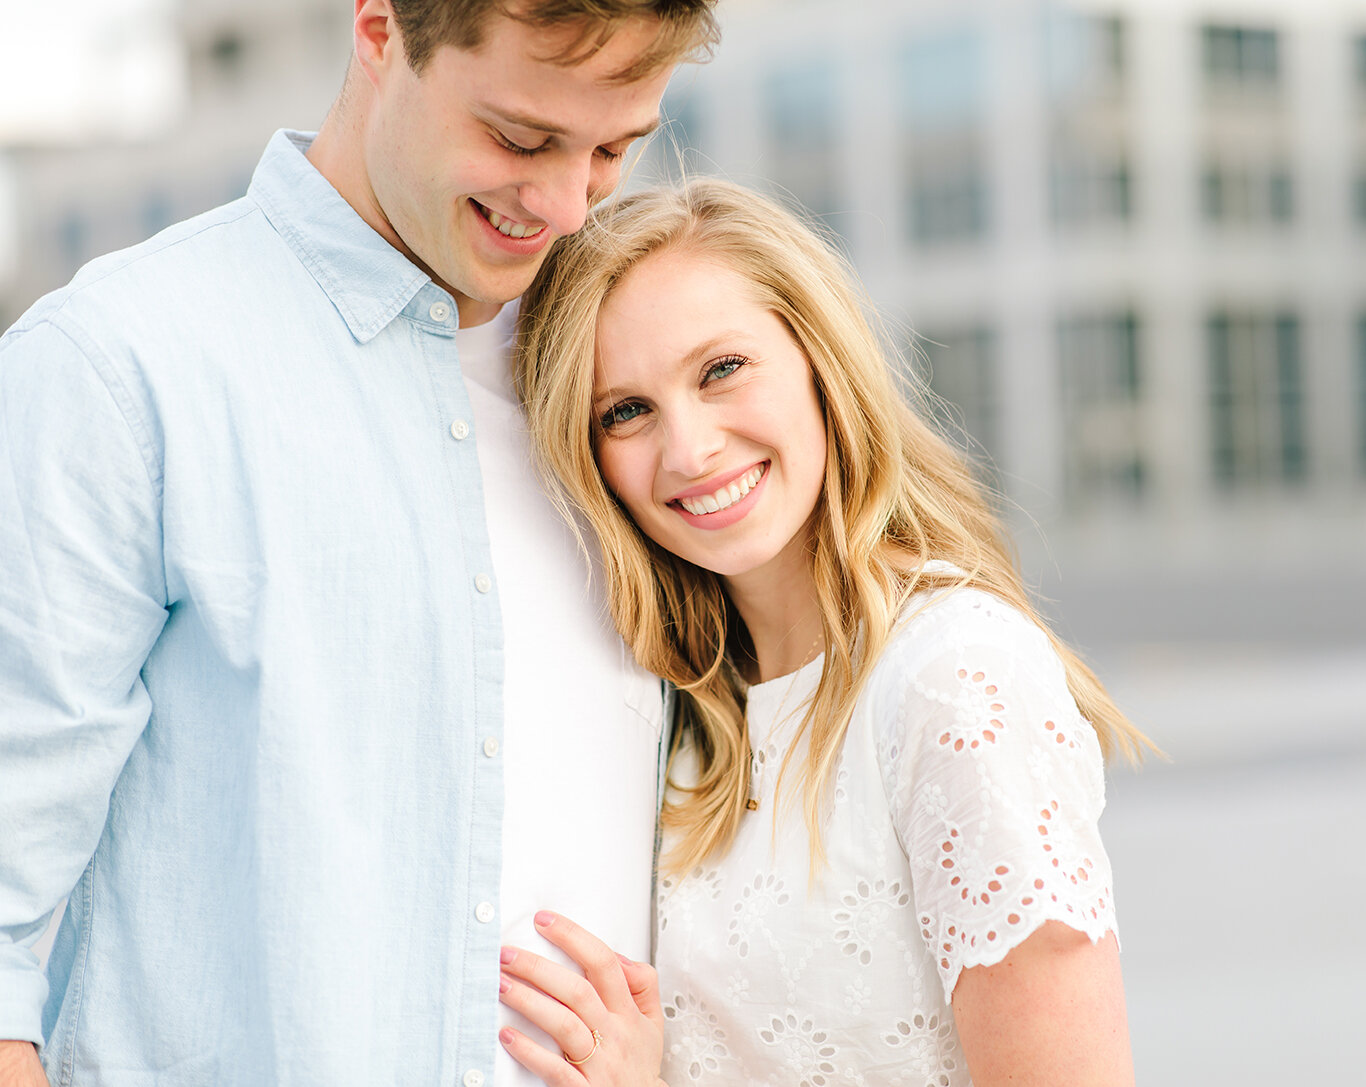  cityscape downtown engagement photo session city creek mall harmon’s building rooftop photo shoot light blue collared shirt white lace short sleeve dress loose hanging curls salt lake city utah professional utah valley engagement photographer #downt